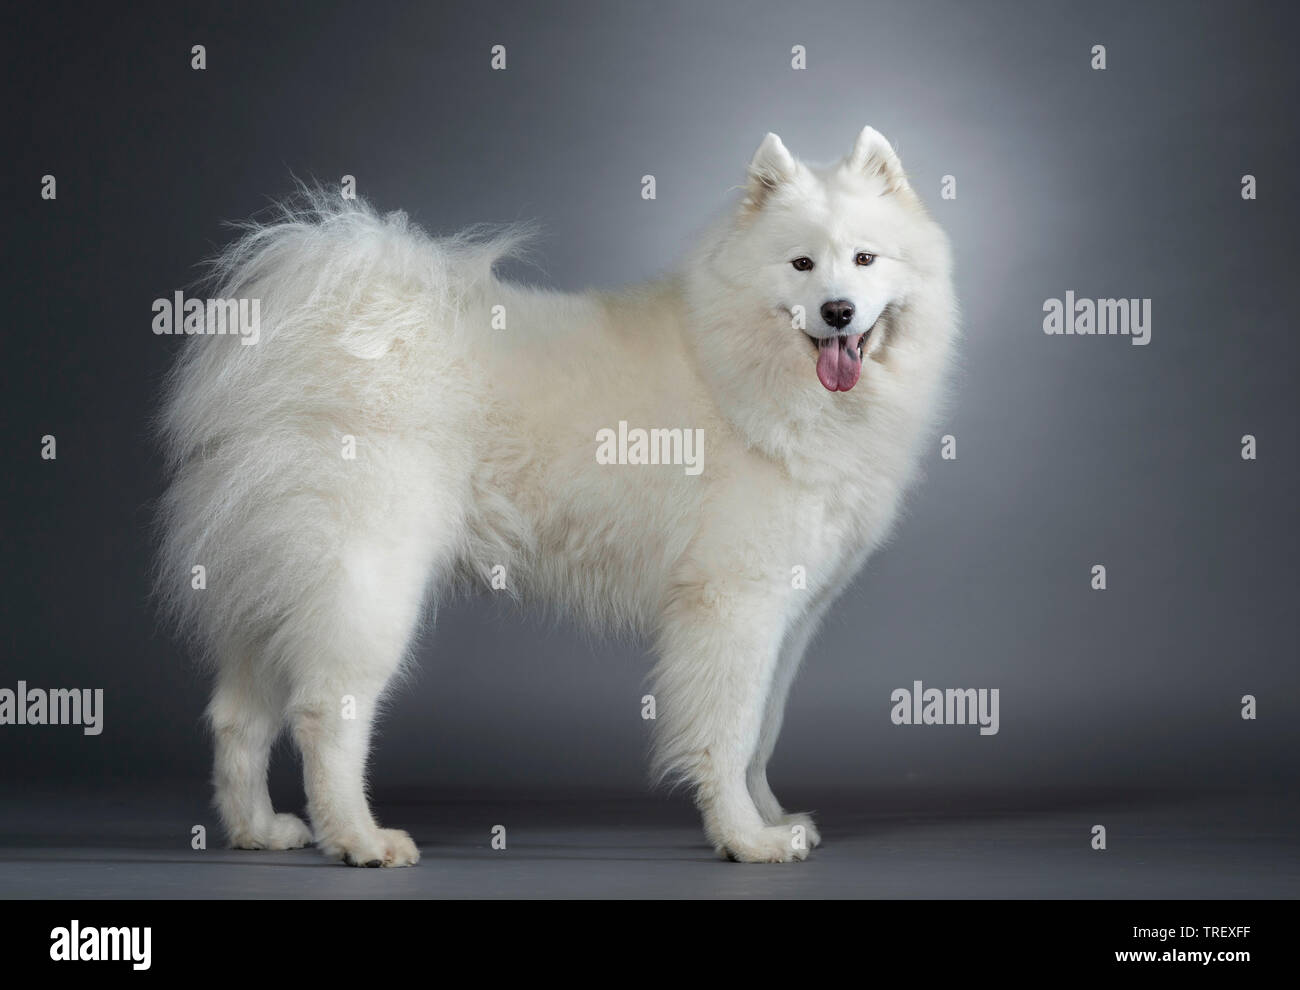 Samoyed. Adult dog standing, seen side-on. Studio picture against a gray background. Germany Stock Photo